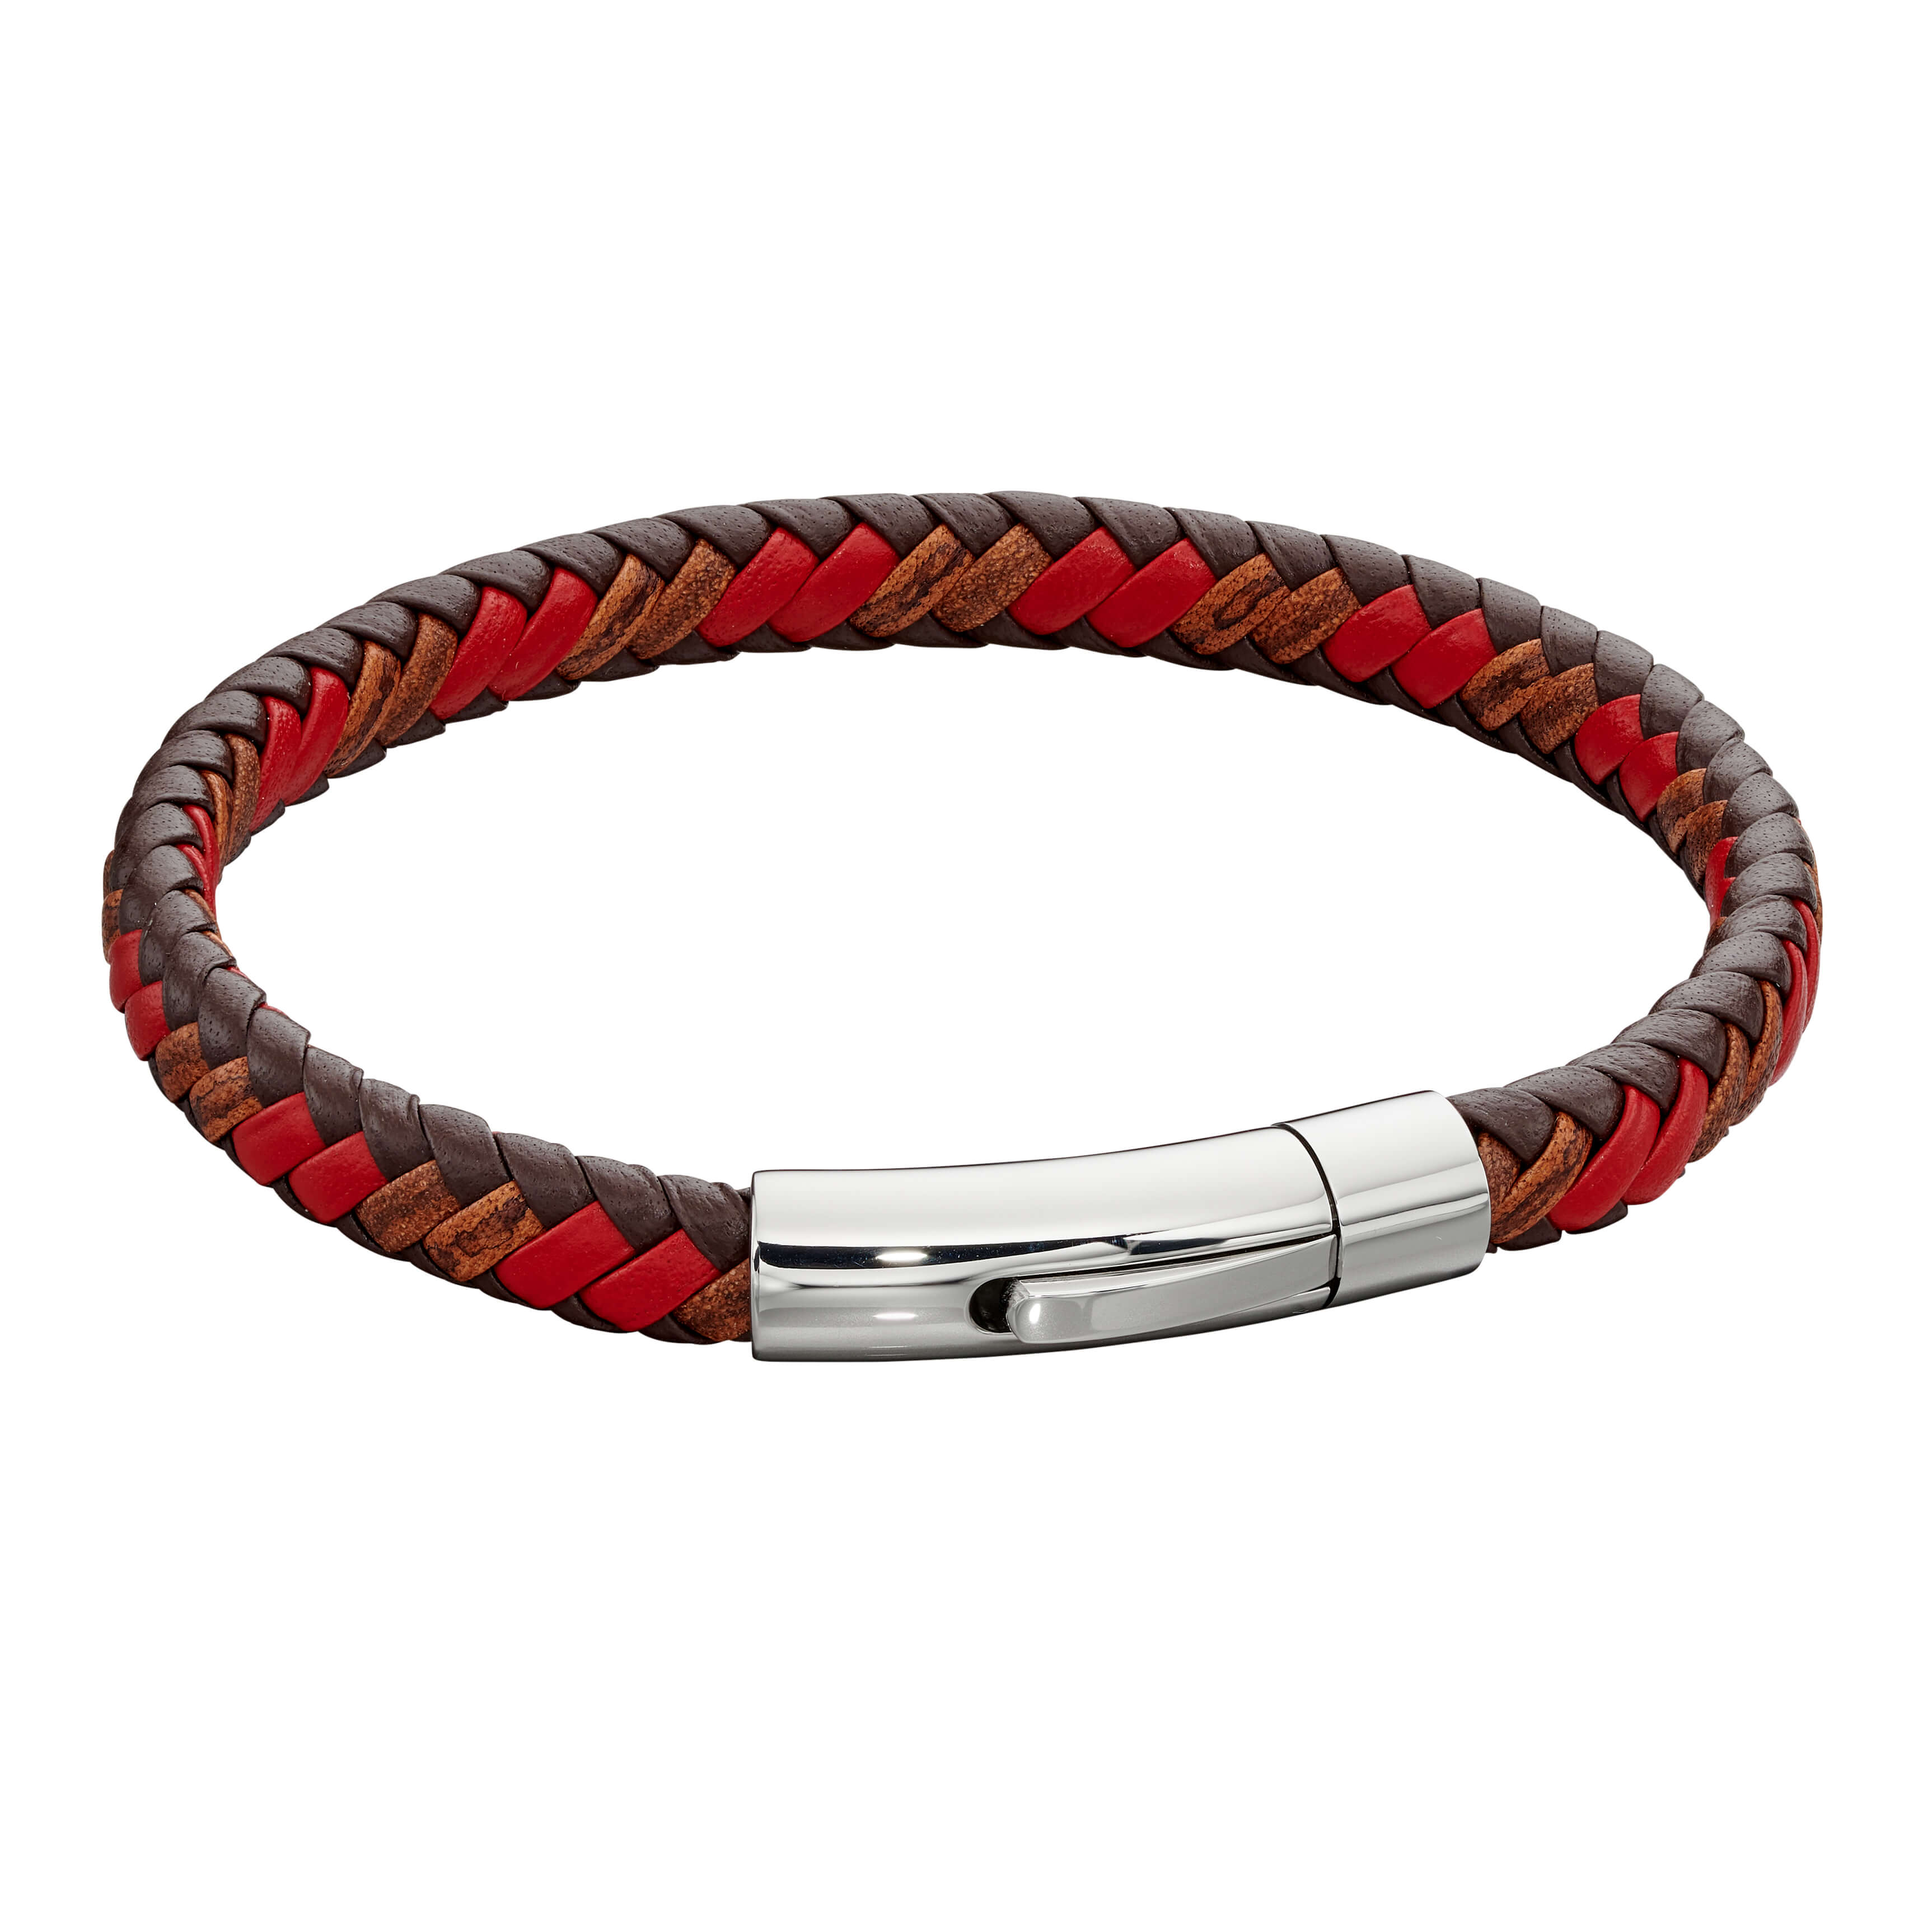 Stainless Steel & Red Woven Leather Bracelet - FB0014 - Hallmark Jewellers Formby & The Jewellers Bench Widnes